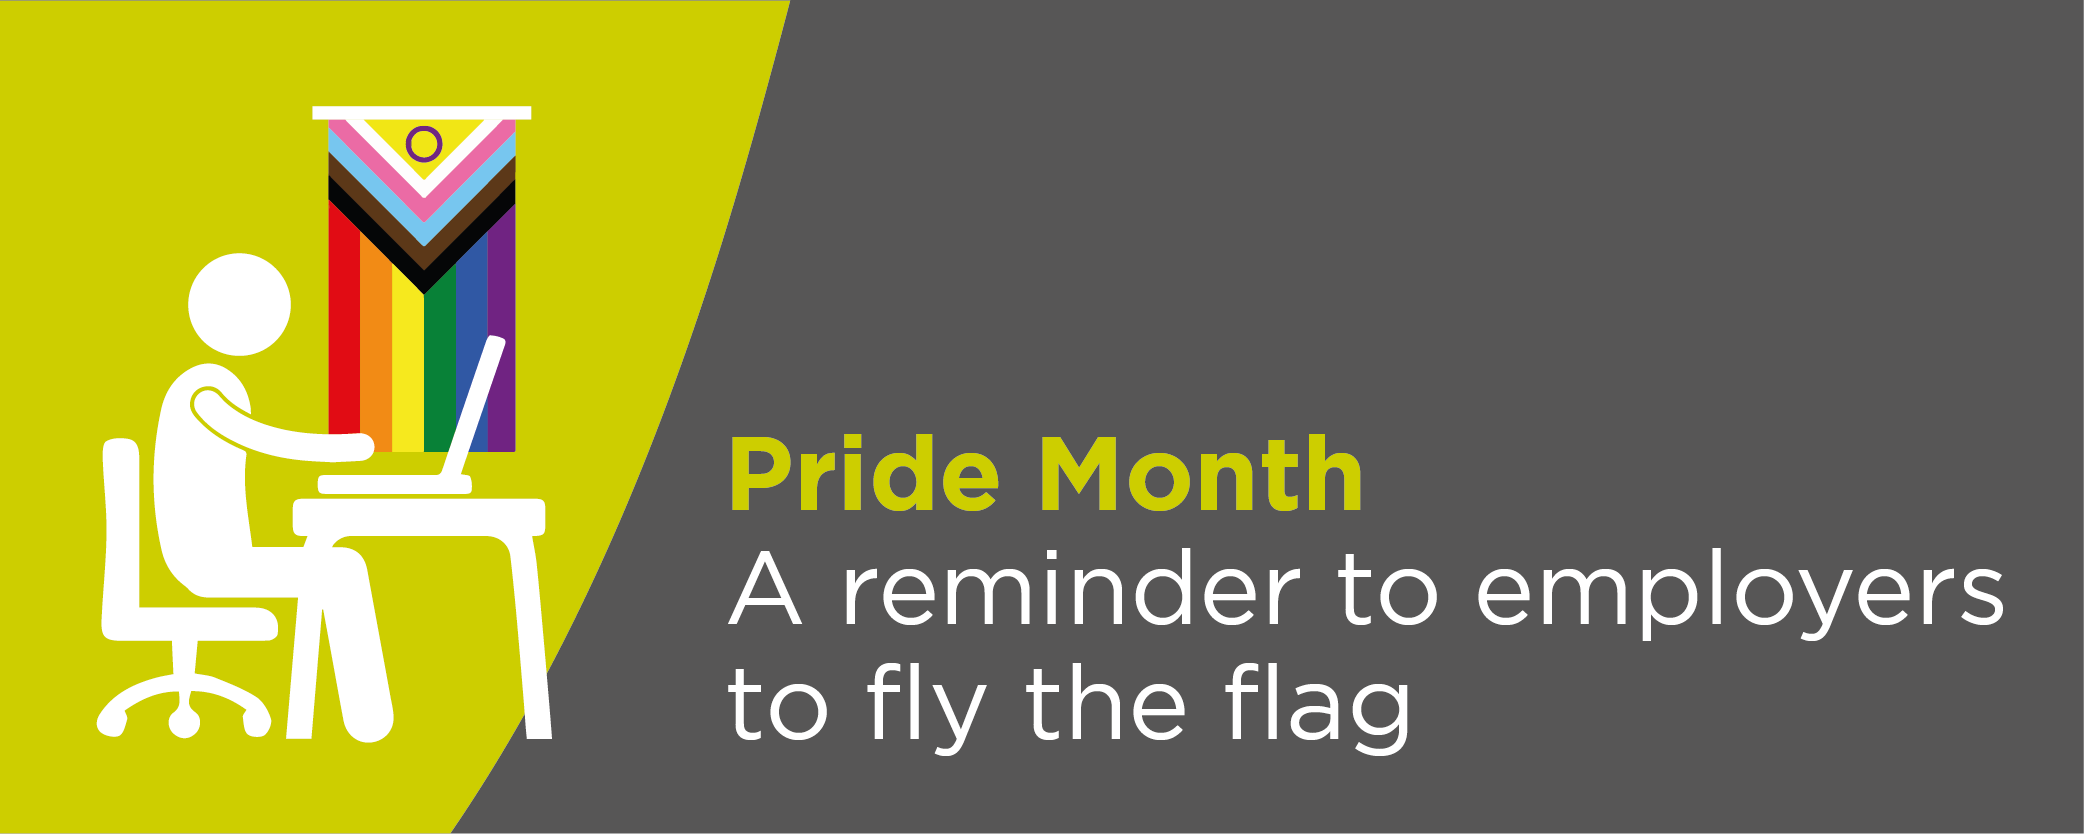 Pride Month: A reminder to employers to fly the flag